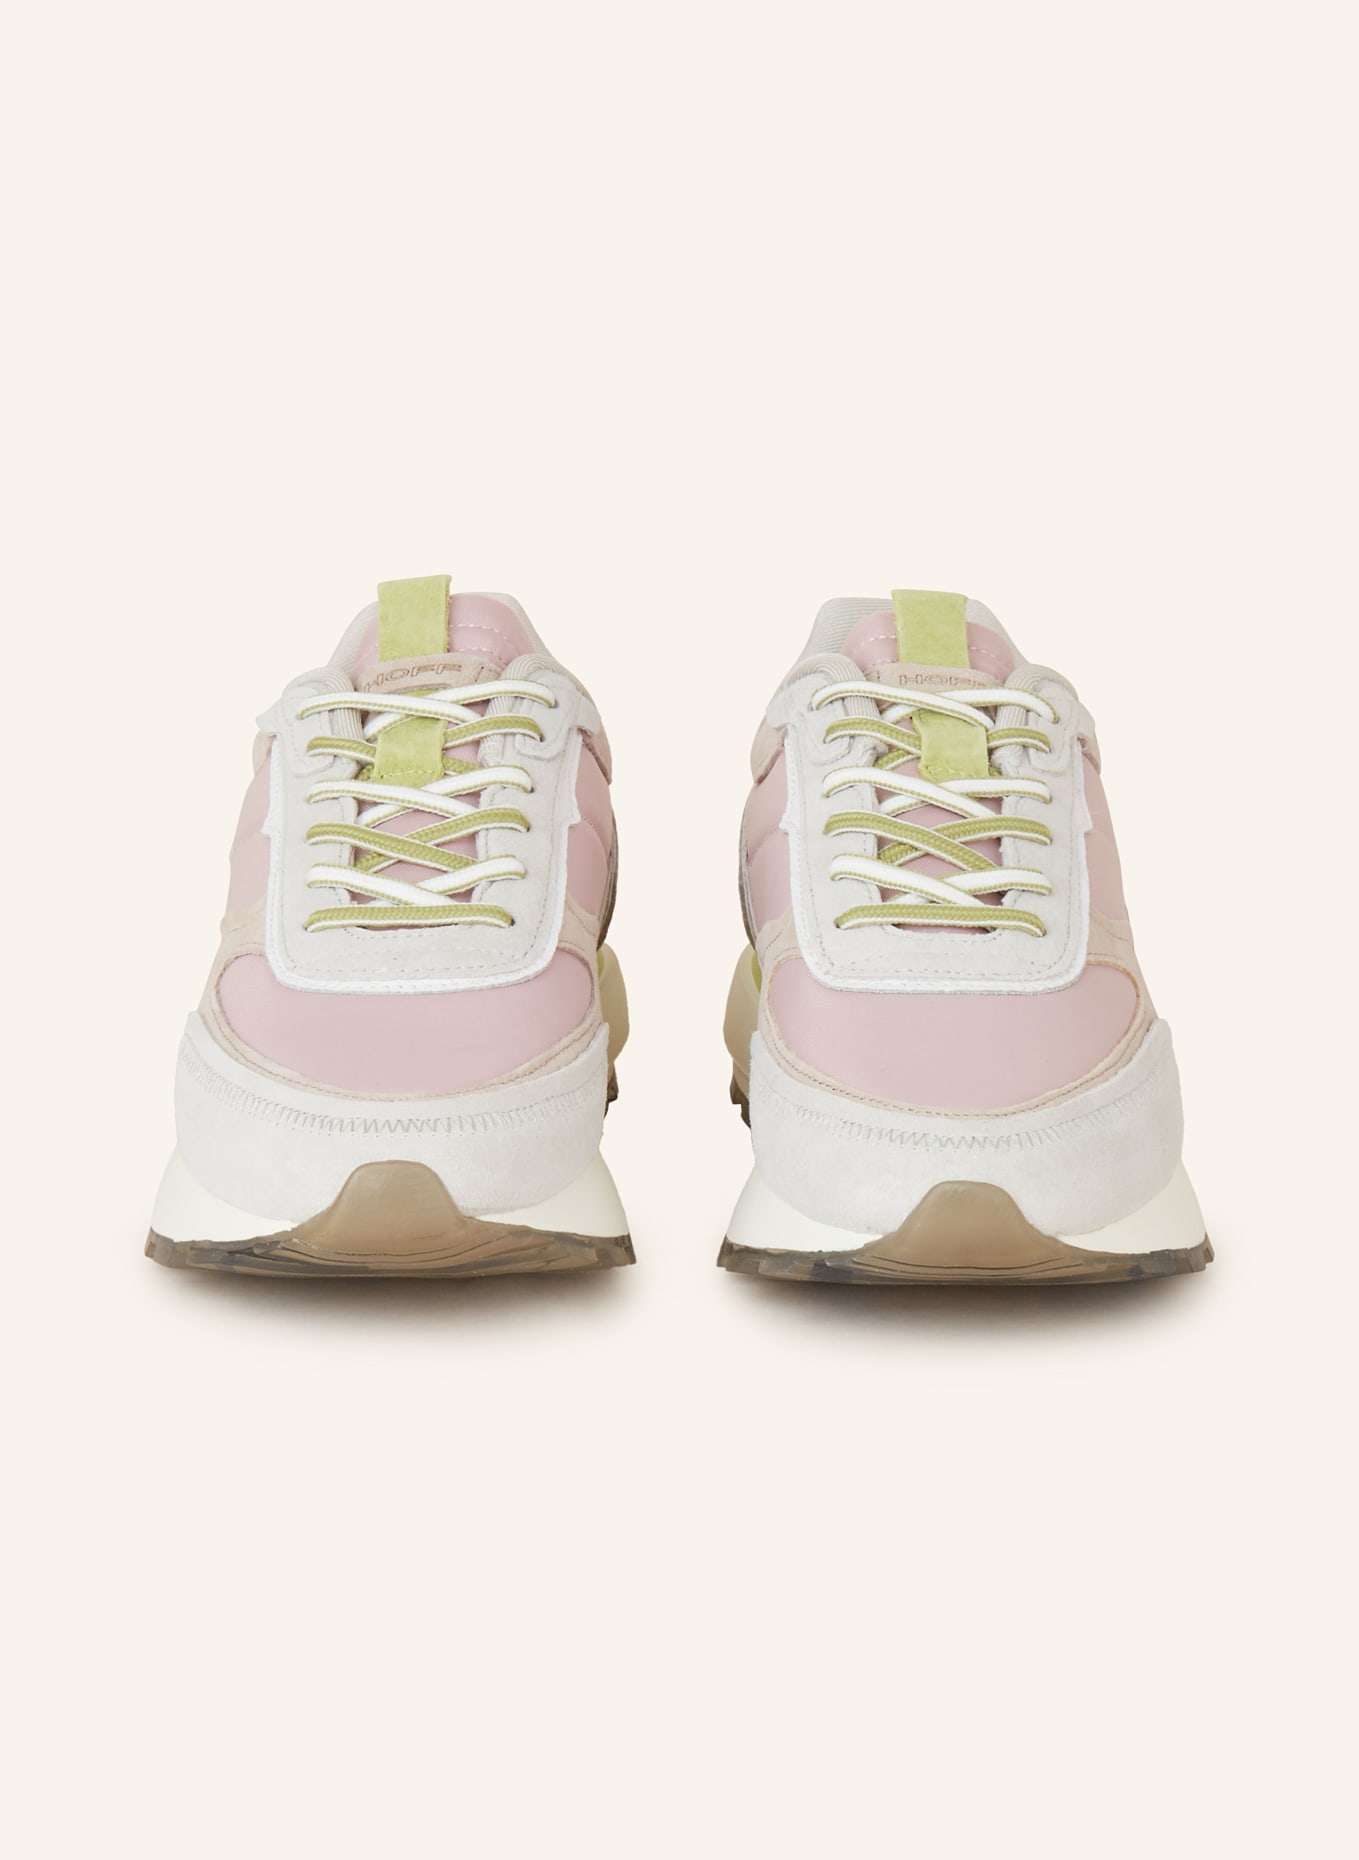 HOFF Sneakers EYRE, Color: PINK/ TAUPE/ LIGHT GRAY (Image 3)